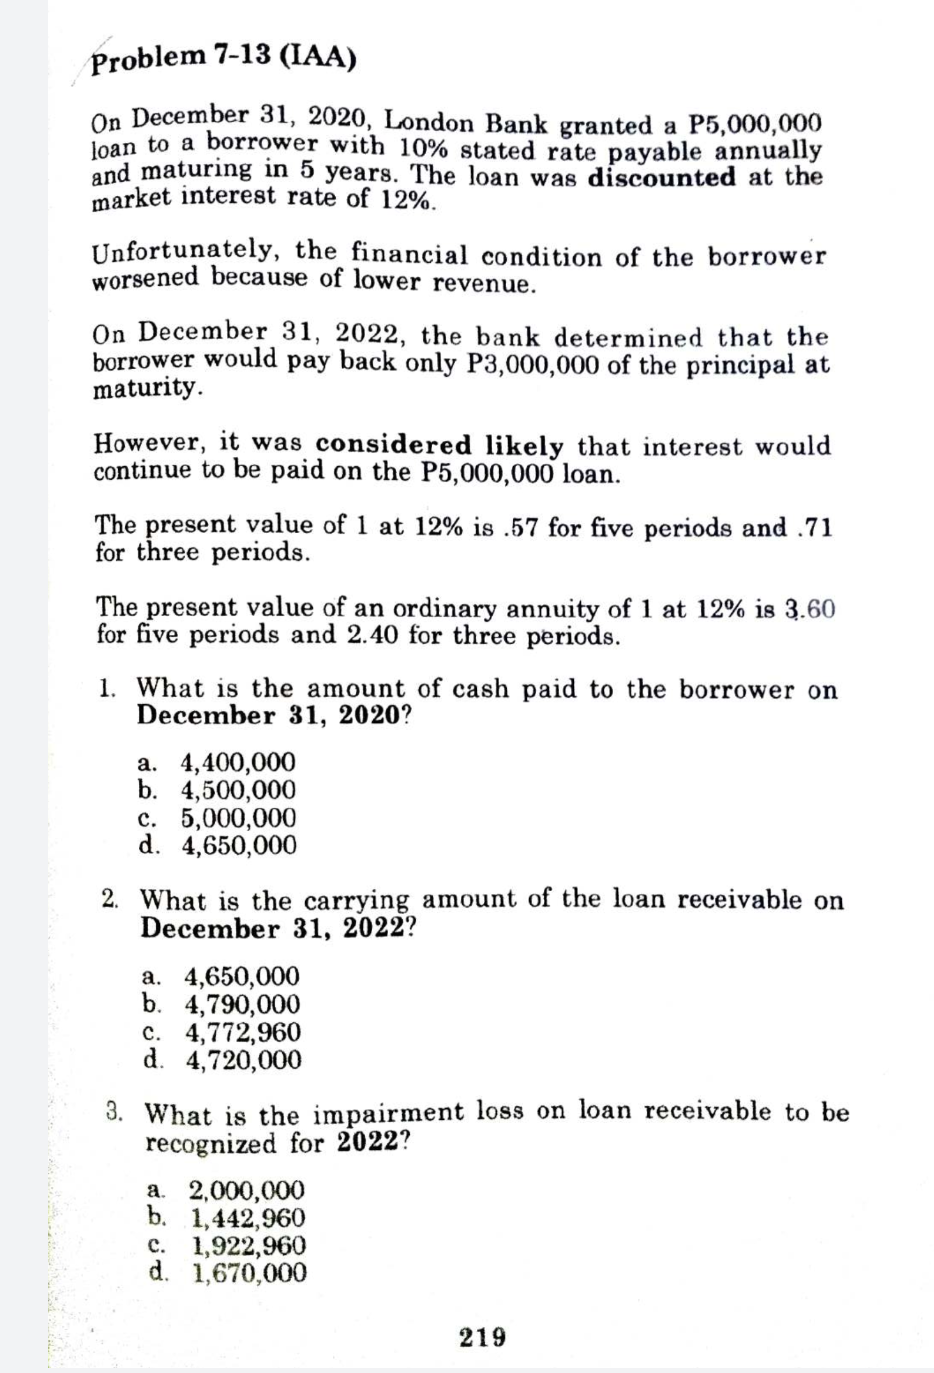 Problem 7-13 (IAA)
On December 31, 2020, London Bank granted a P5,000,000
loan to a borrower with 10% stated rate payable annually
and maturing in 5 years. The loan was discounted at the
market interest rate of 12%.
Unfortunately, the financial condition of the borrower
worsened because of lower revenue.
On December 31, 2022, the bank determined that the
borrower would pay back only P3,000,000 of the principal at
maturity.
However, it was considered likely that interest would
continue to be paid on the P5,000,000 loan.
The present value of 1 at 12% is .57 for five periods and .71
for three periods.
The present value of an ordinary annuity of 1 at 12% is 3.60
for five periods and 2.40 for three periods.
1. What is the amount of cash paid to the borrower on
December 31, 2020?
а. 4,400,000
b. 4,500,000
с. 5,000,000
d. 4,650,000
2. What is the carrying amount of the loan receivable on
December 31, 2022?
а. 4,650,000
b. 4,790,000
c. 4,772,960
d. 4,720,000
3. What is the impairment loss on loan receivable to be
recognized for 2022?
a. 2,000,000
b. 1,442,960
с. 1,922,960
d. 1,670,000
219
